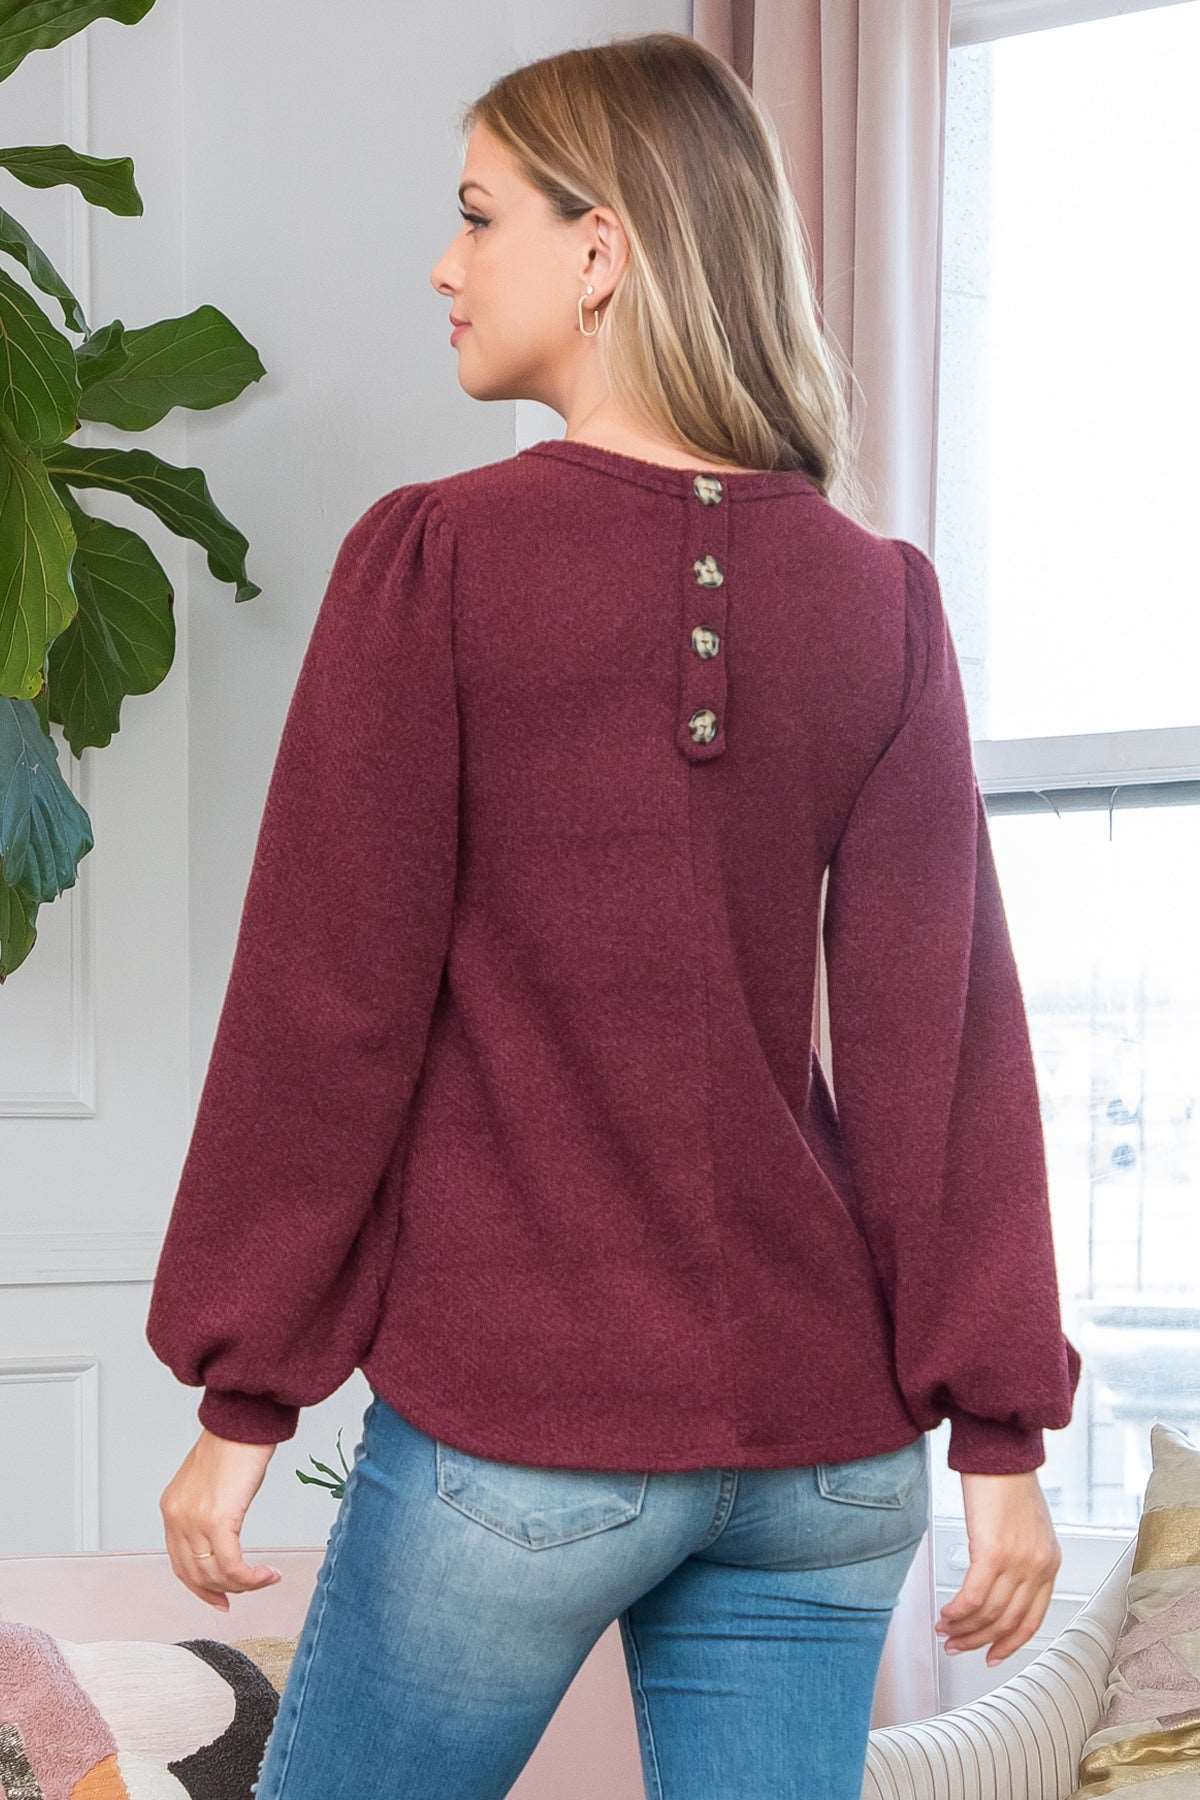 Curvy Out of the Woods Sweater (Maroon)